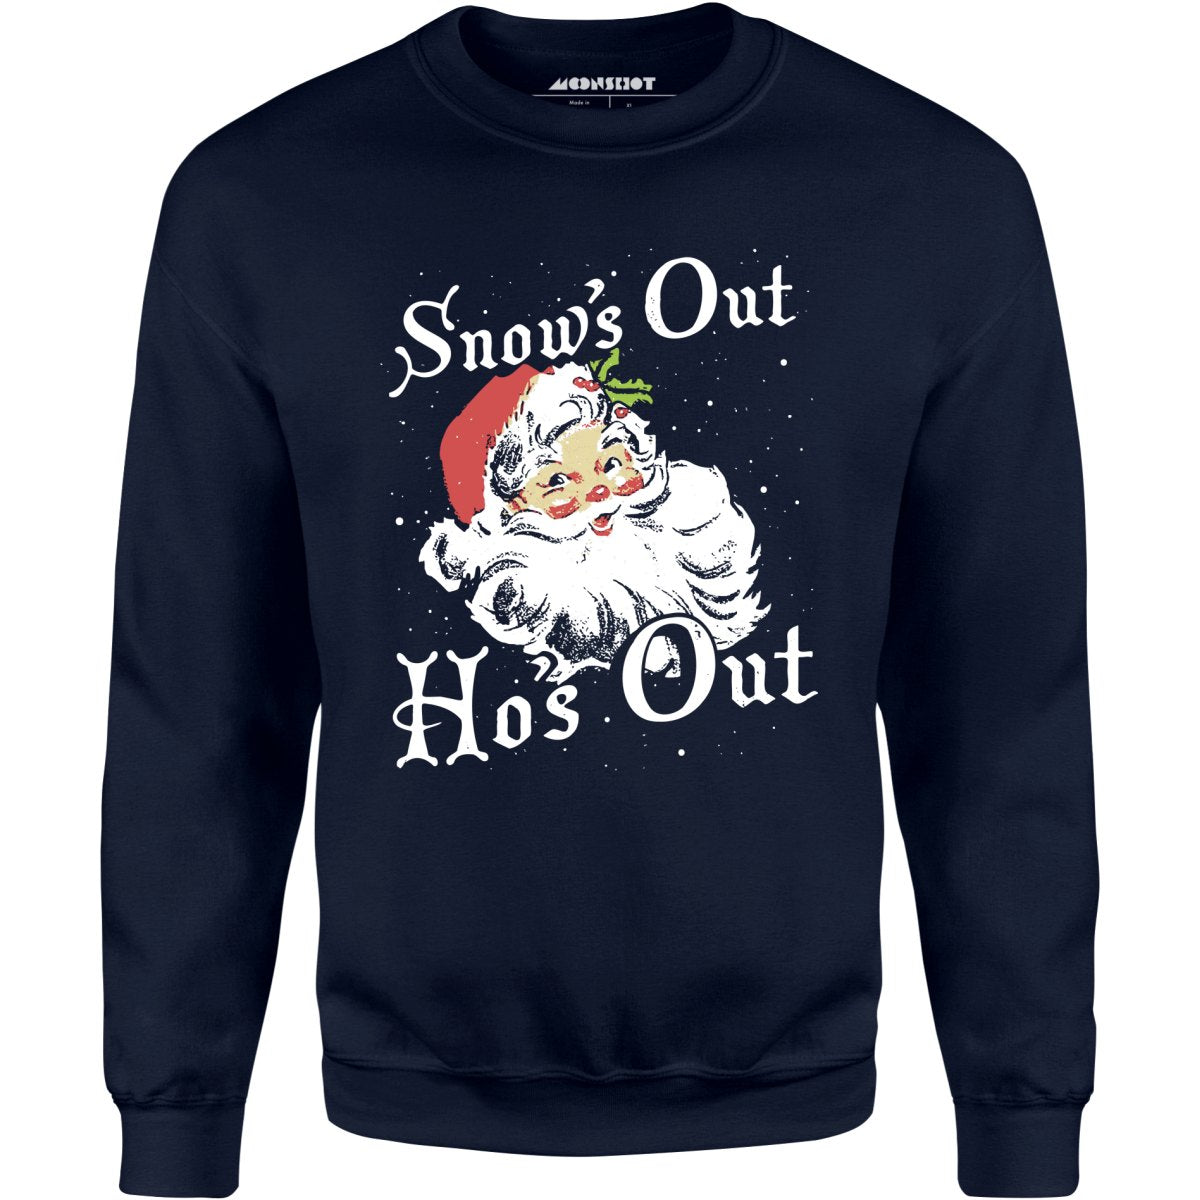 Snow's Out Ho's Out - Unisex Sweatshirt